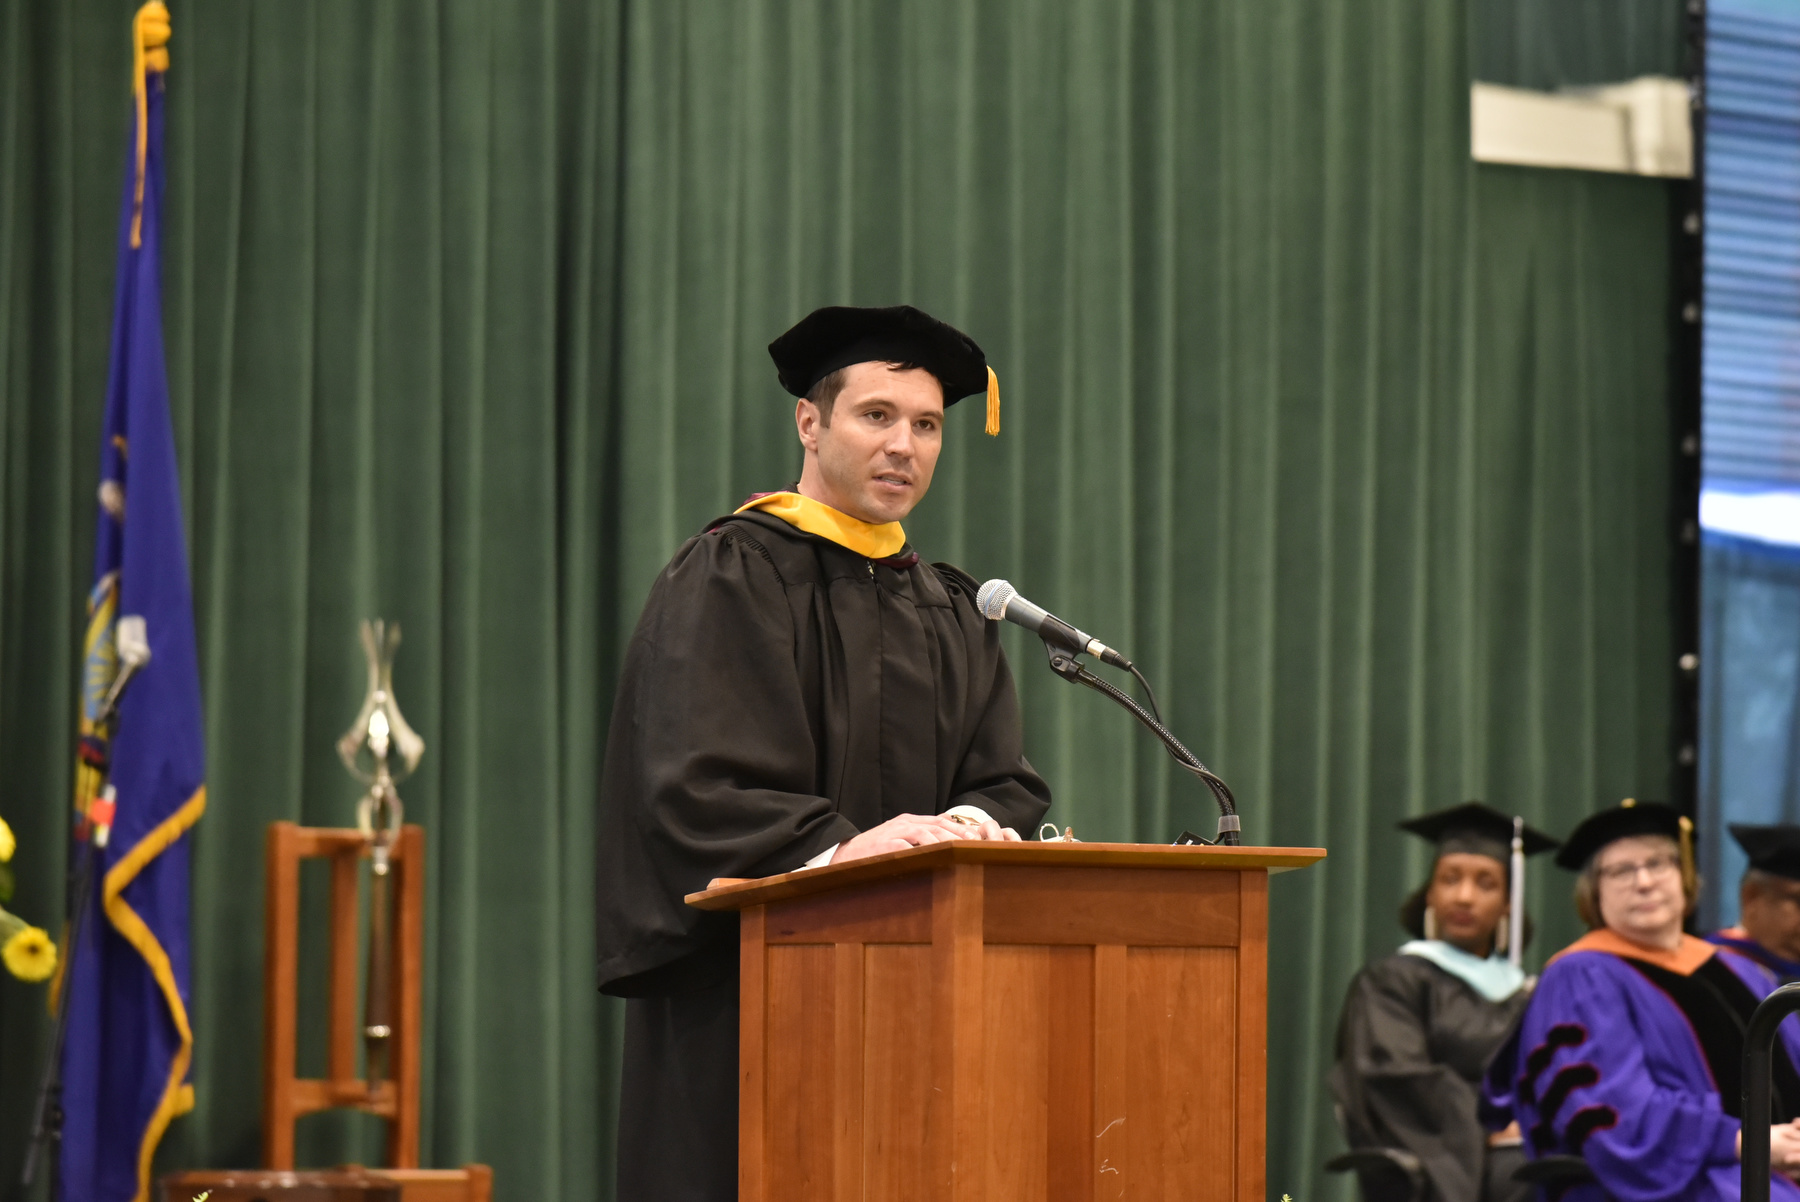 Billy Barlow, mayor of the City of Oswego, served as Commencement speaker at the 12:30 p.m. ceremony for the School of Business.